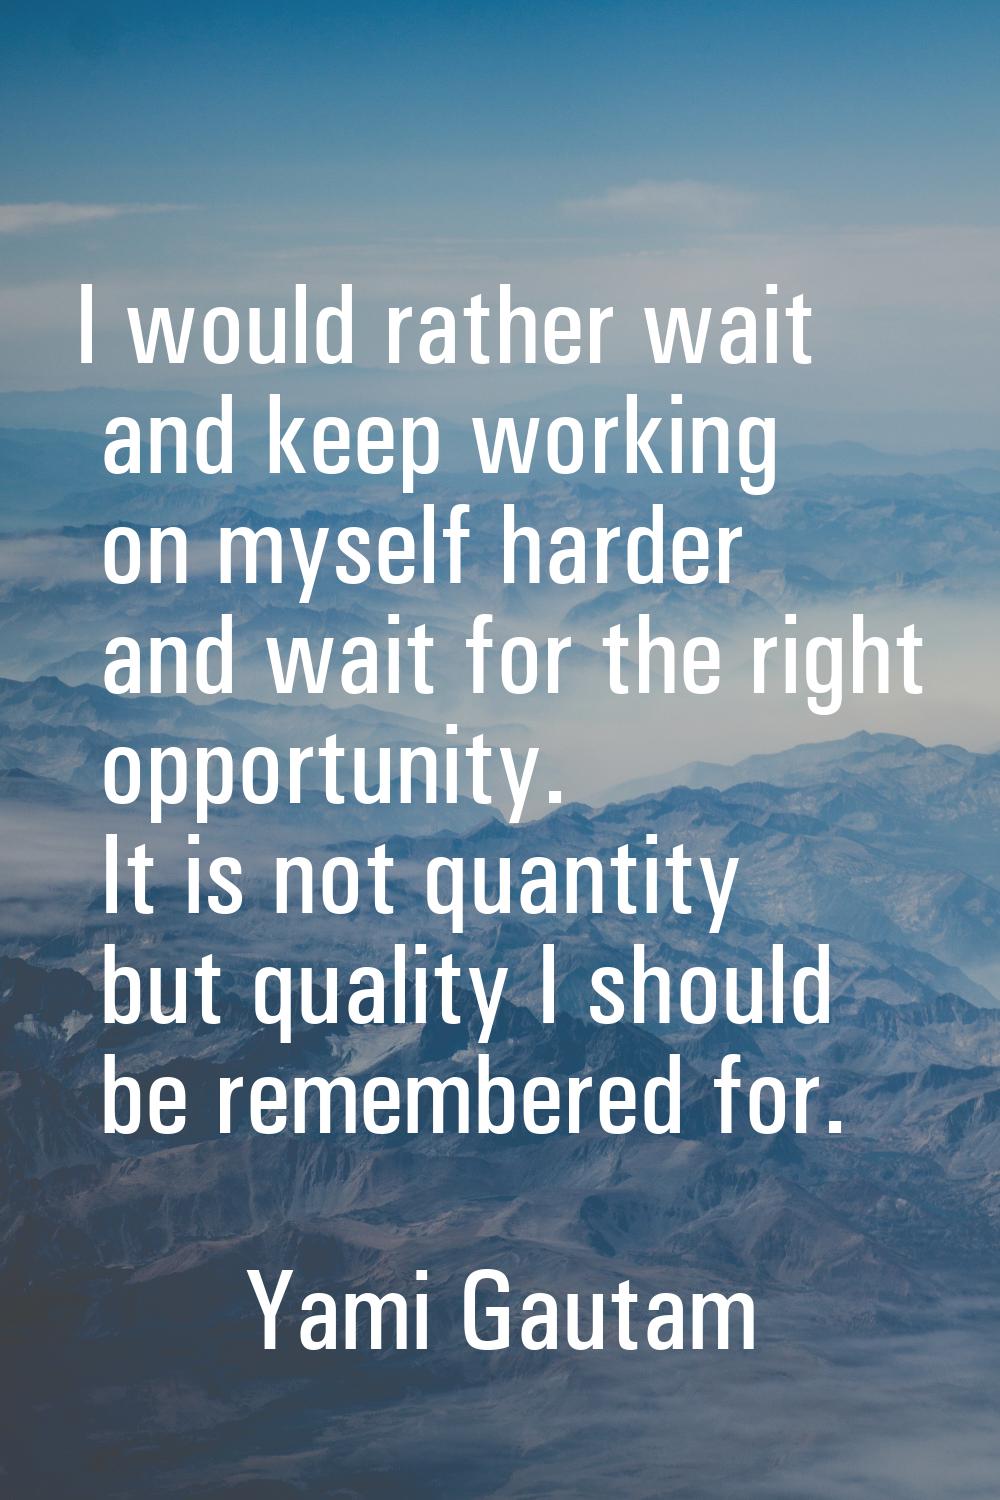 I would rather wait and keep working on myself harder and wait for the right opportunity. It is not